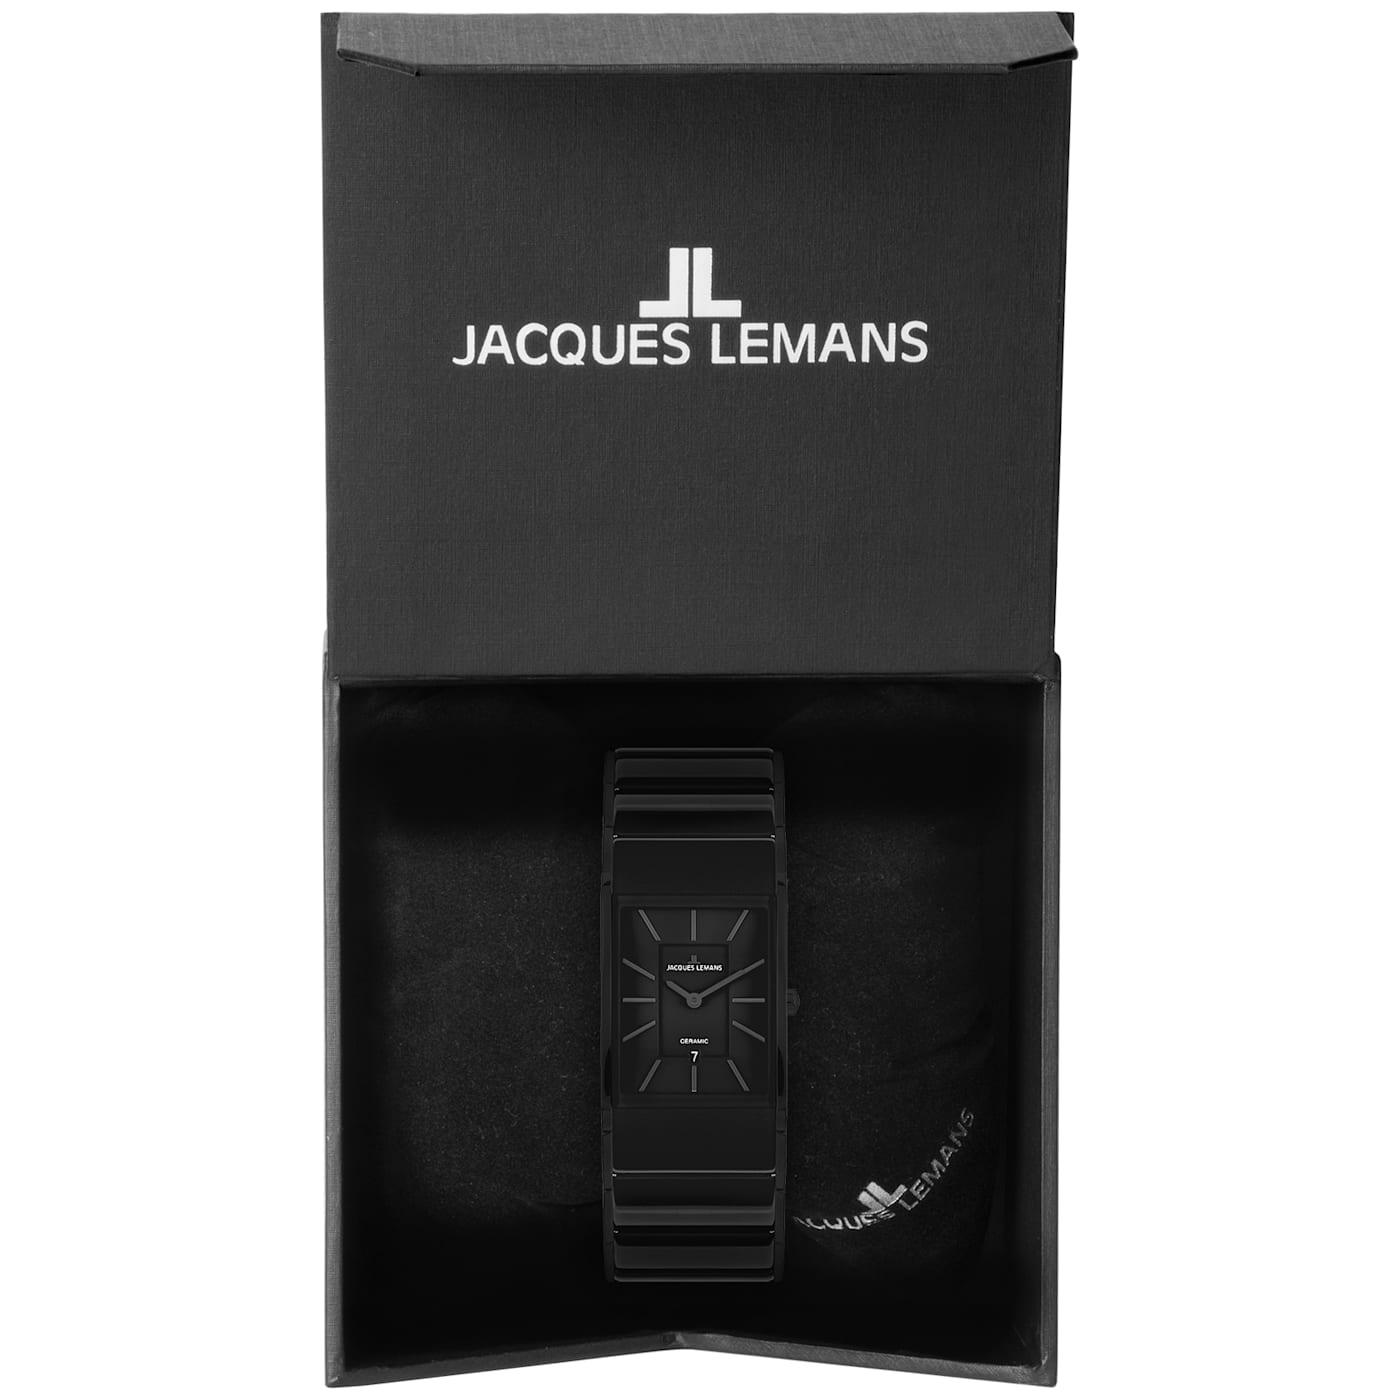 JACQUES LEMANS 12CX7A Dublin - High-Tech Strap, Stainless IP-Black, Steel Men\'s 1-1939 Watch Ceramic with